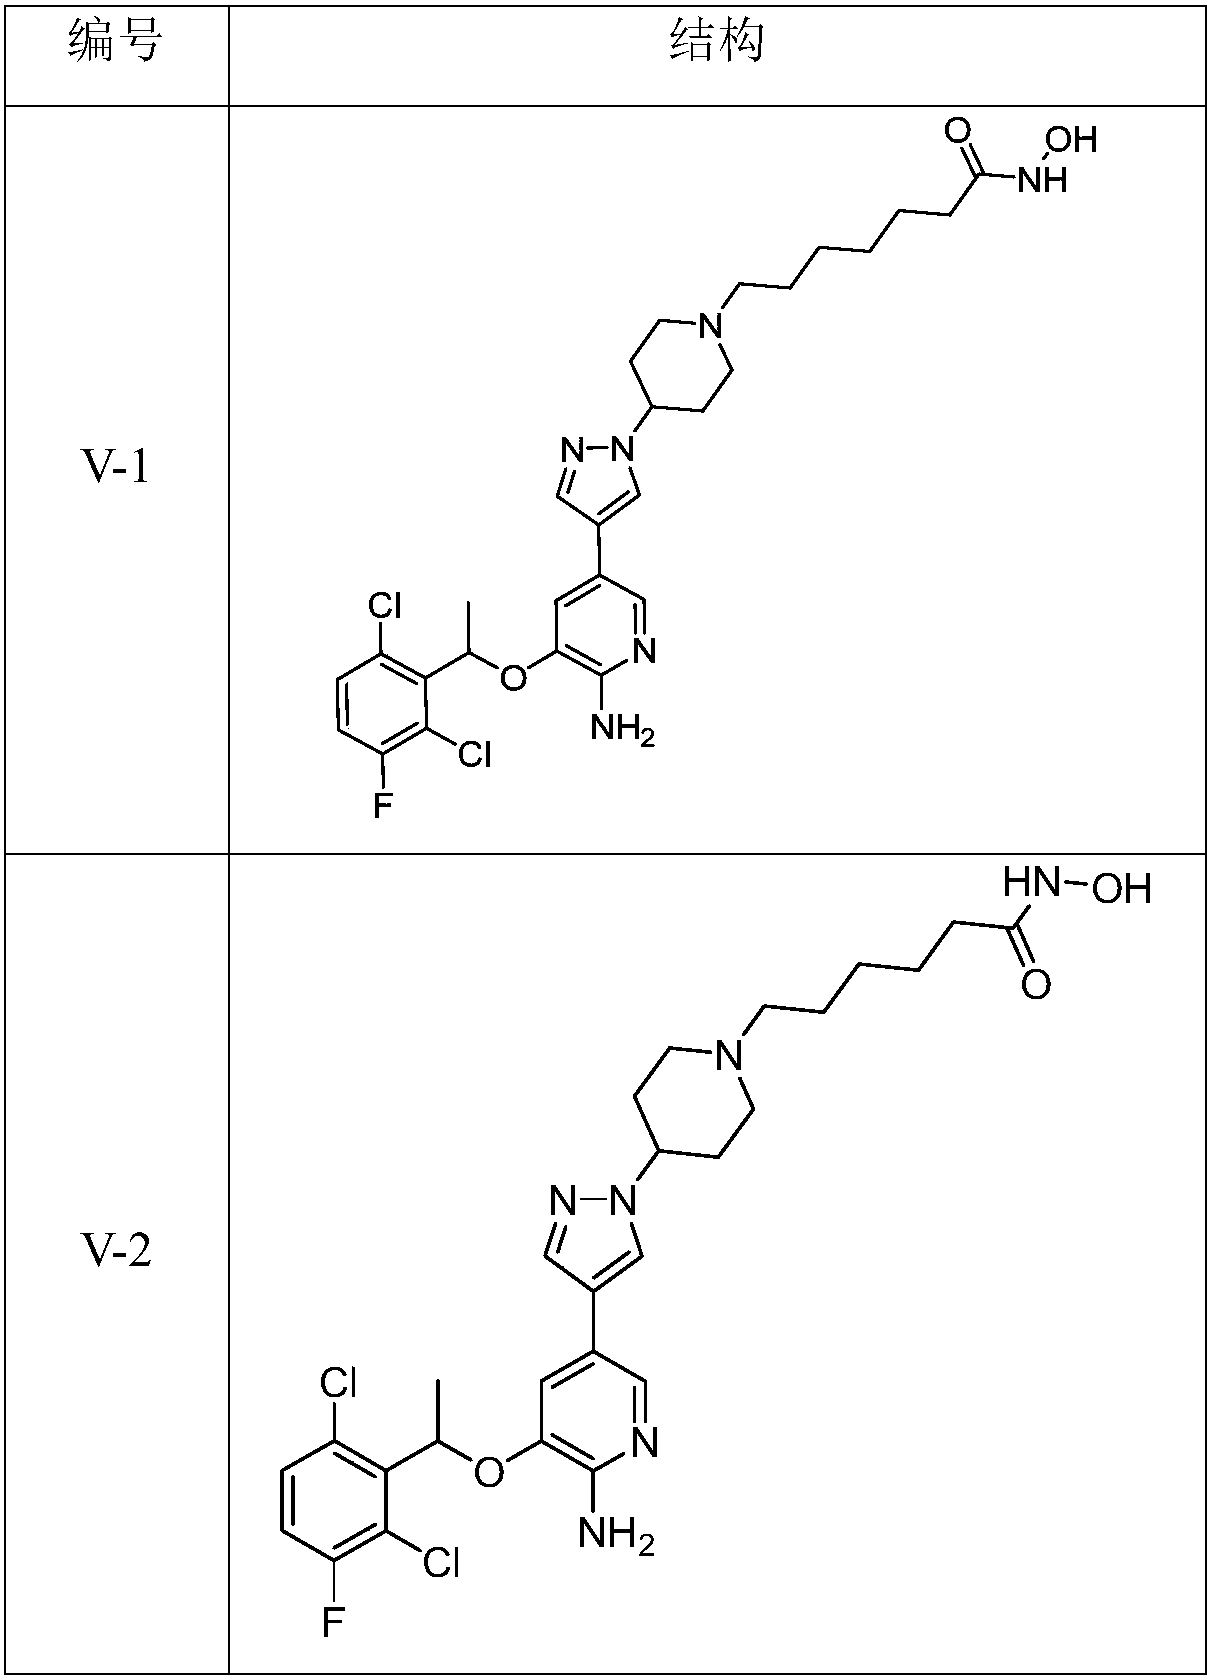 Aminopyridine derivative containing hydroxamic acid fragment as well as application thereof to anti-tumor aspect